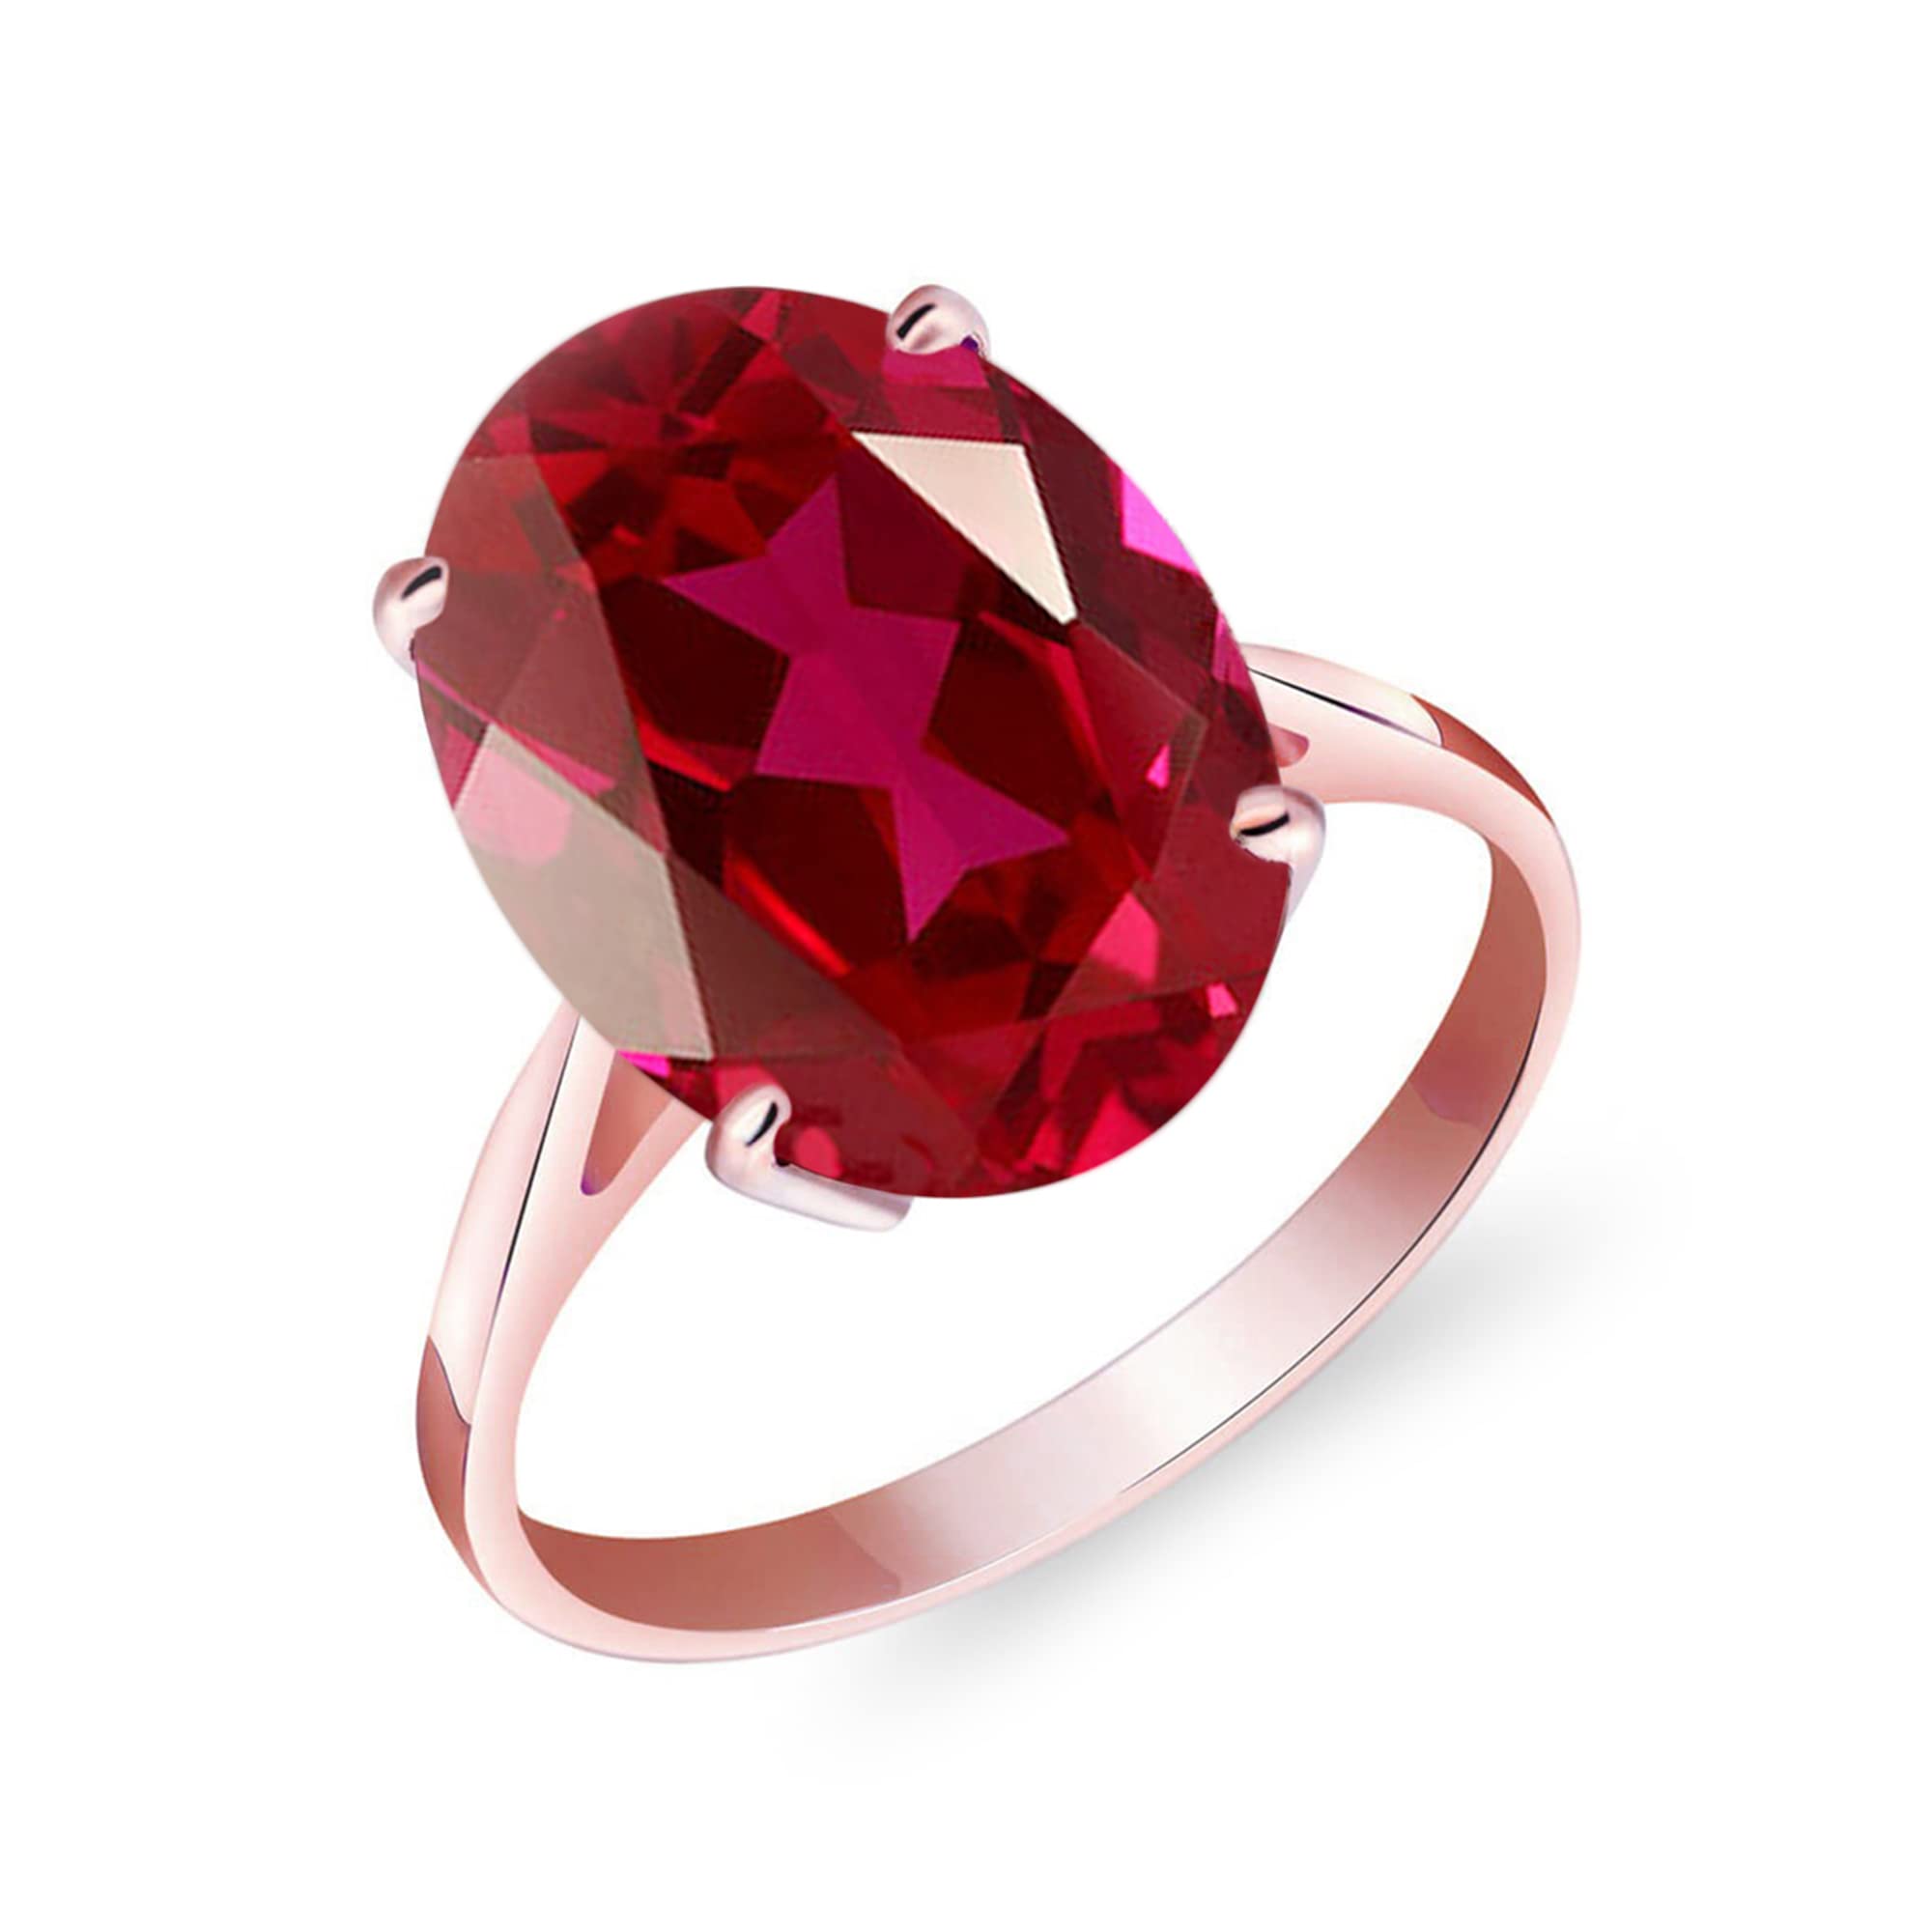 Galaxy Gold GG 14k Solid Rose Gold Ring 7.5 ct Oval-Shaped Ruby